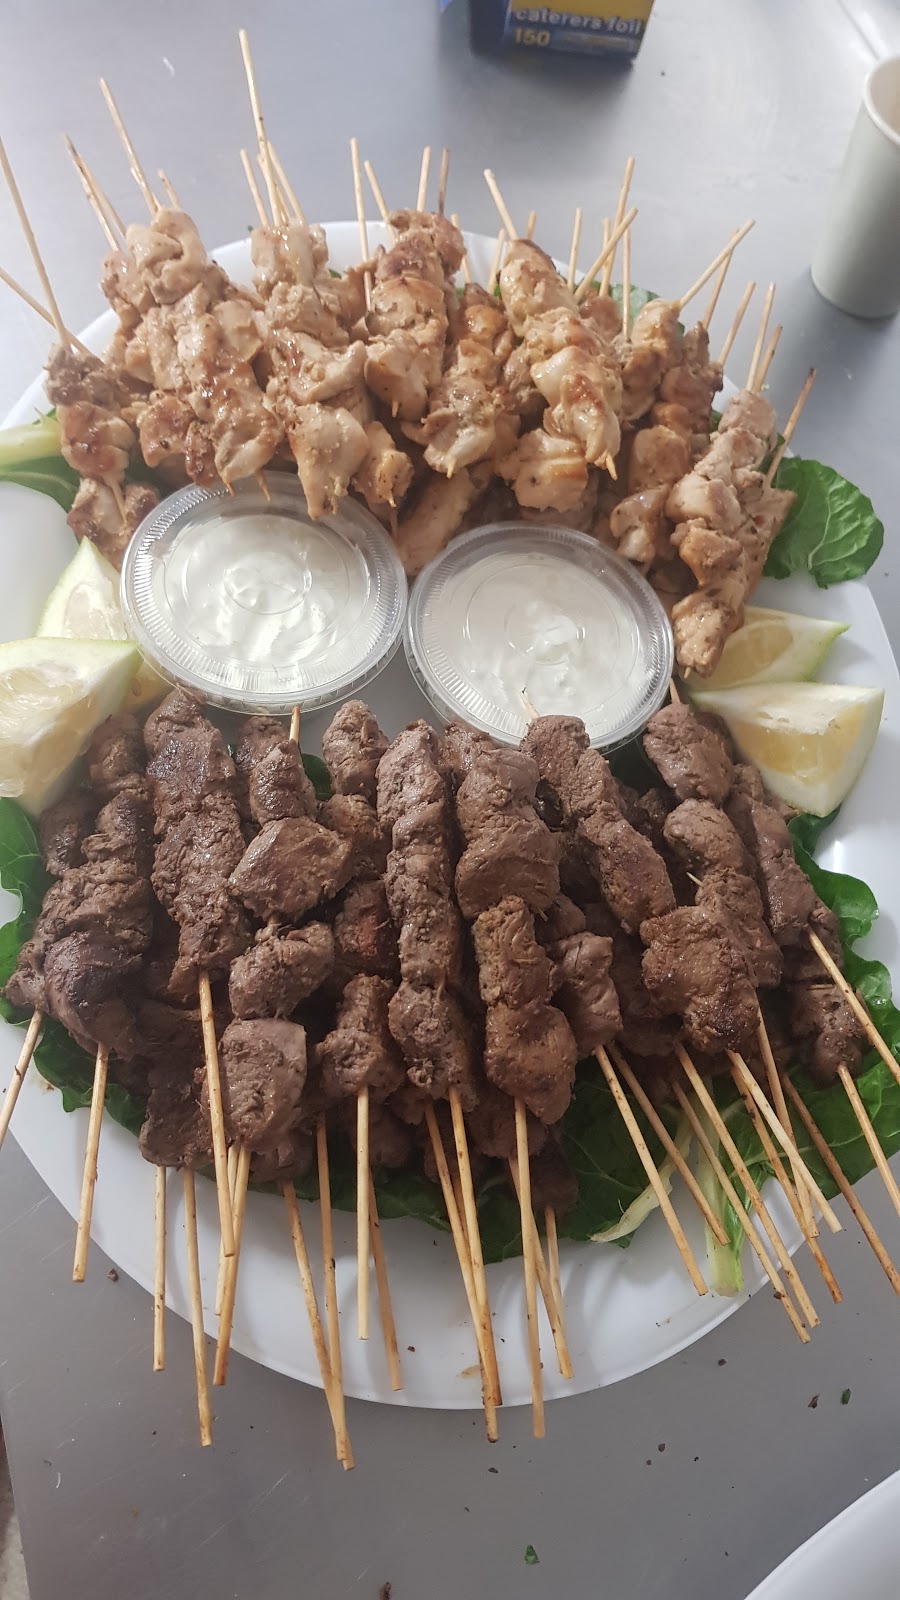 Party Catering 2U | Westmeadows VIC 3049, Australia | Phone: 0415 587 717